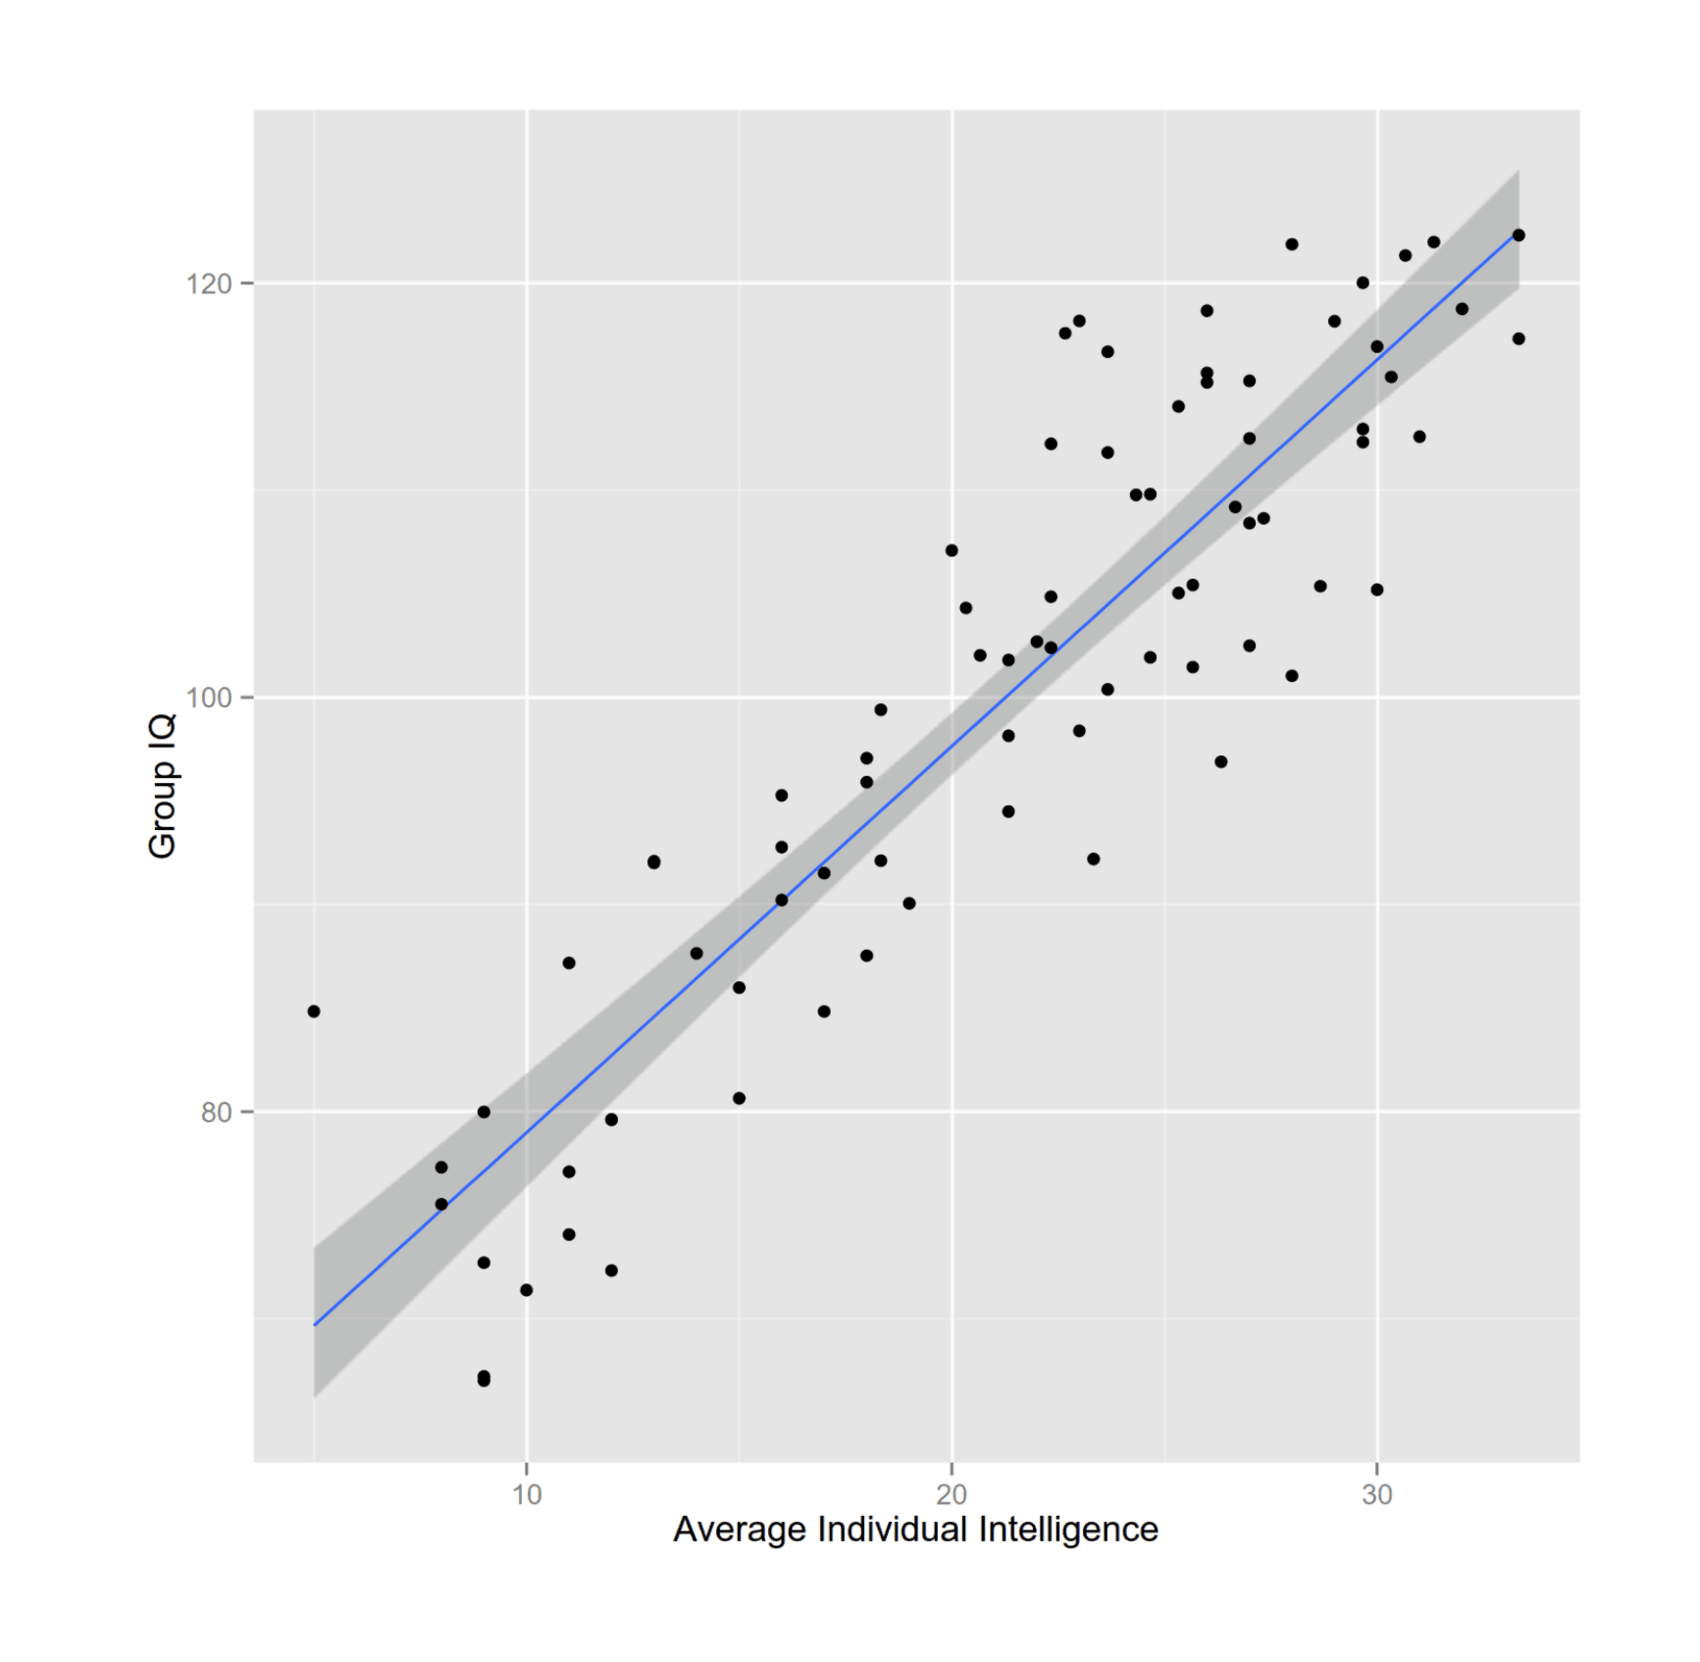 Figure 1: Relationship of individual IQ to group-IQ in the combined data from studies 2 & 3.